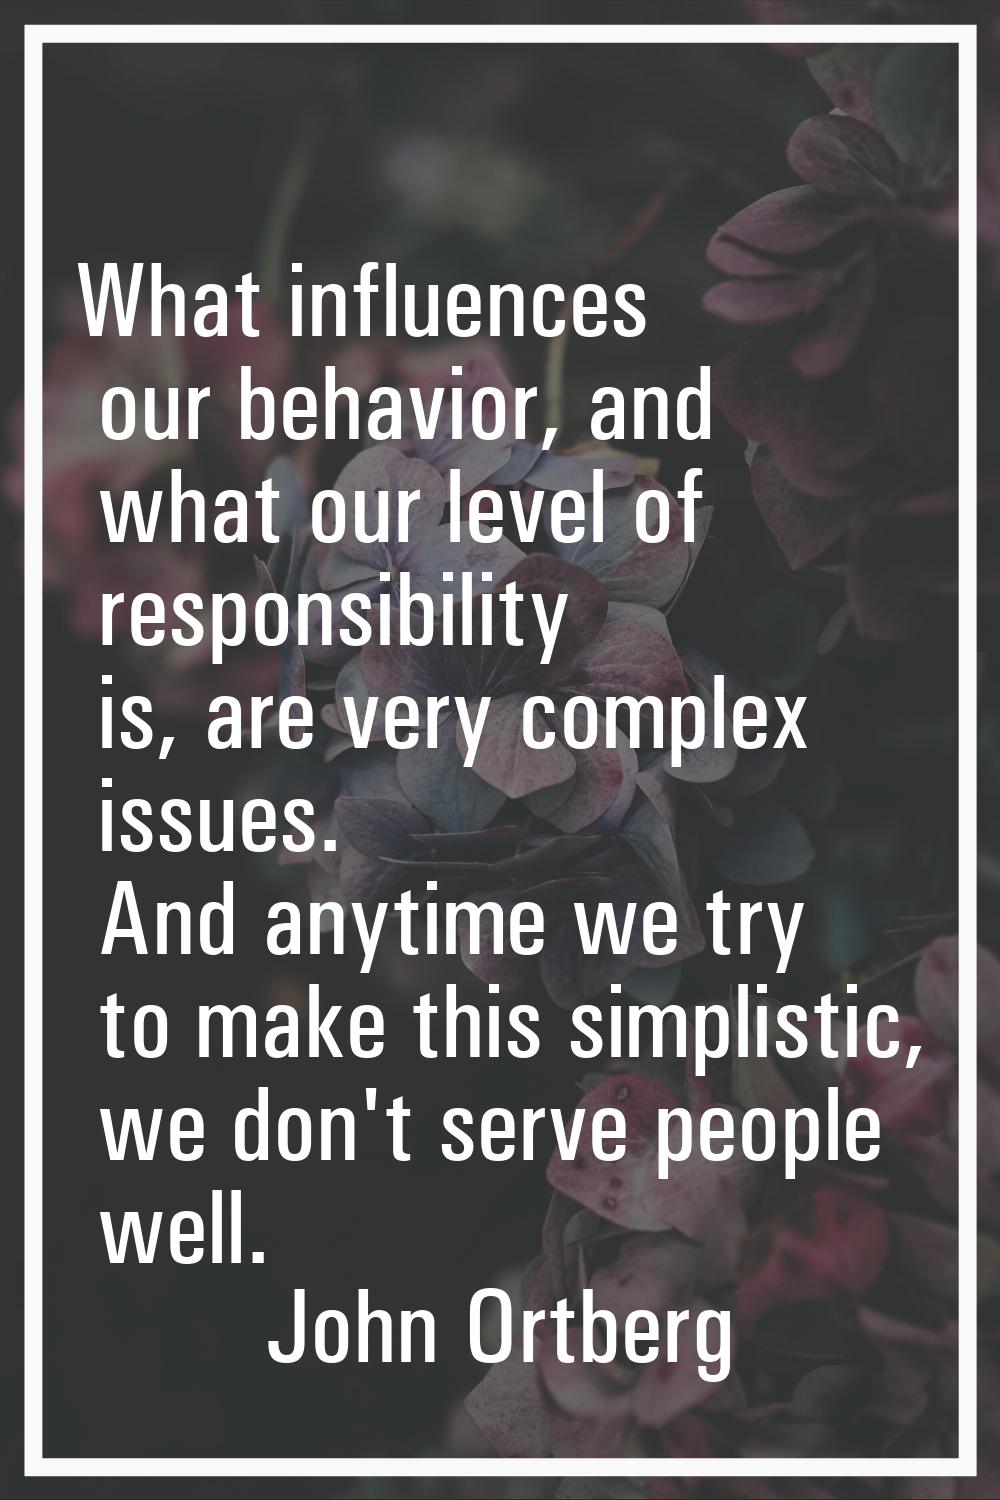 What influences our behavior, and what our level of responsibility is, are very complex issues. And